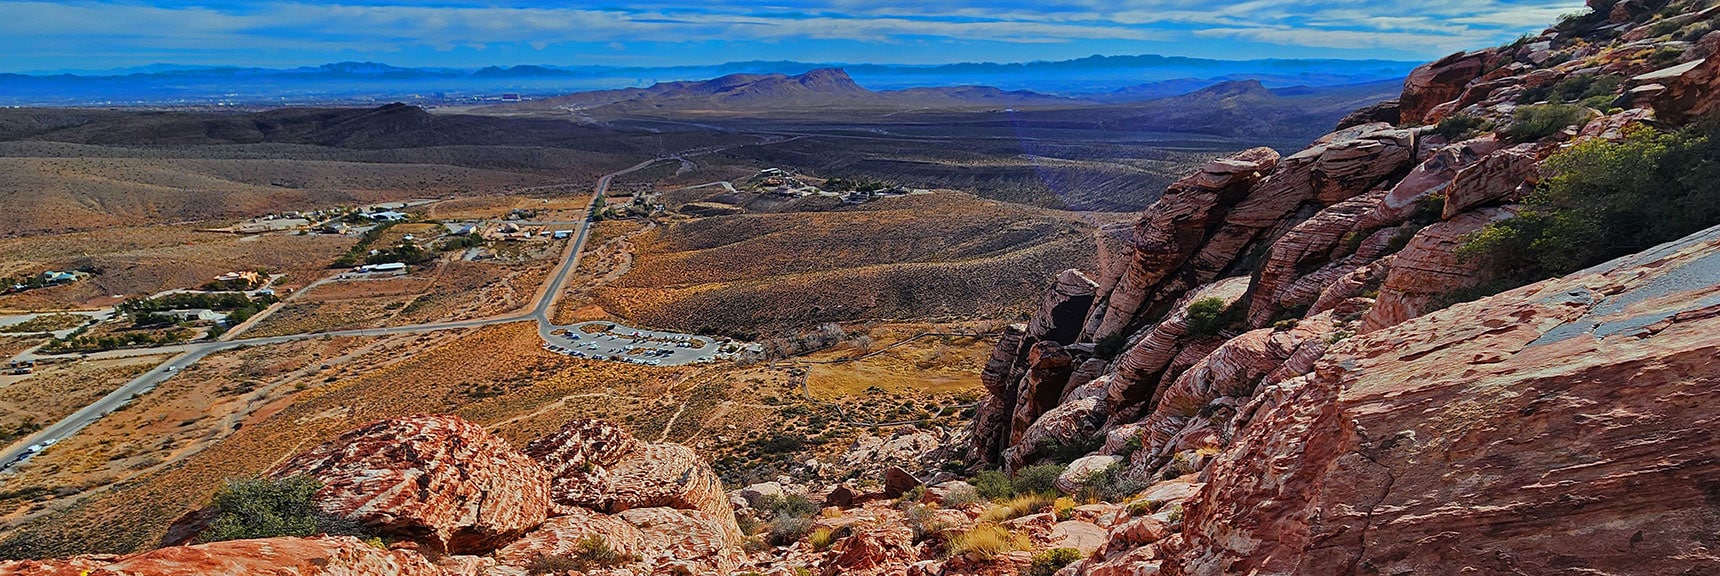 View Down the Grand Staircase Toward Distant Las Vegas Valley and Beyond | Grand Staircase | Calico Basin, Nevada